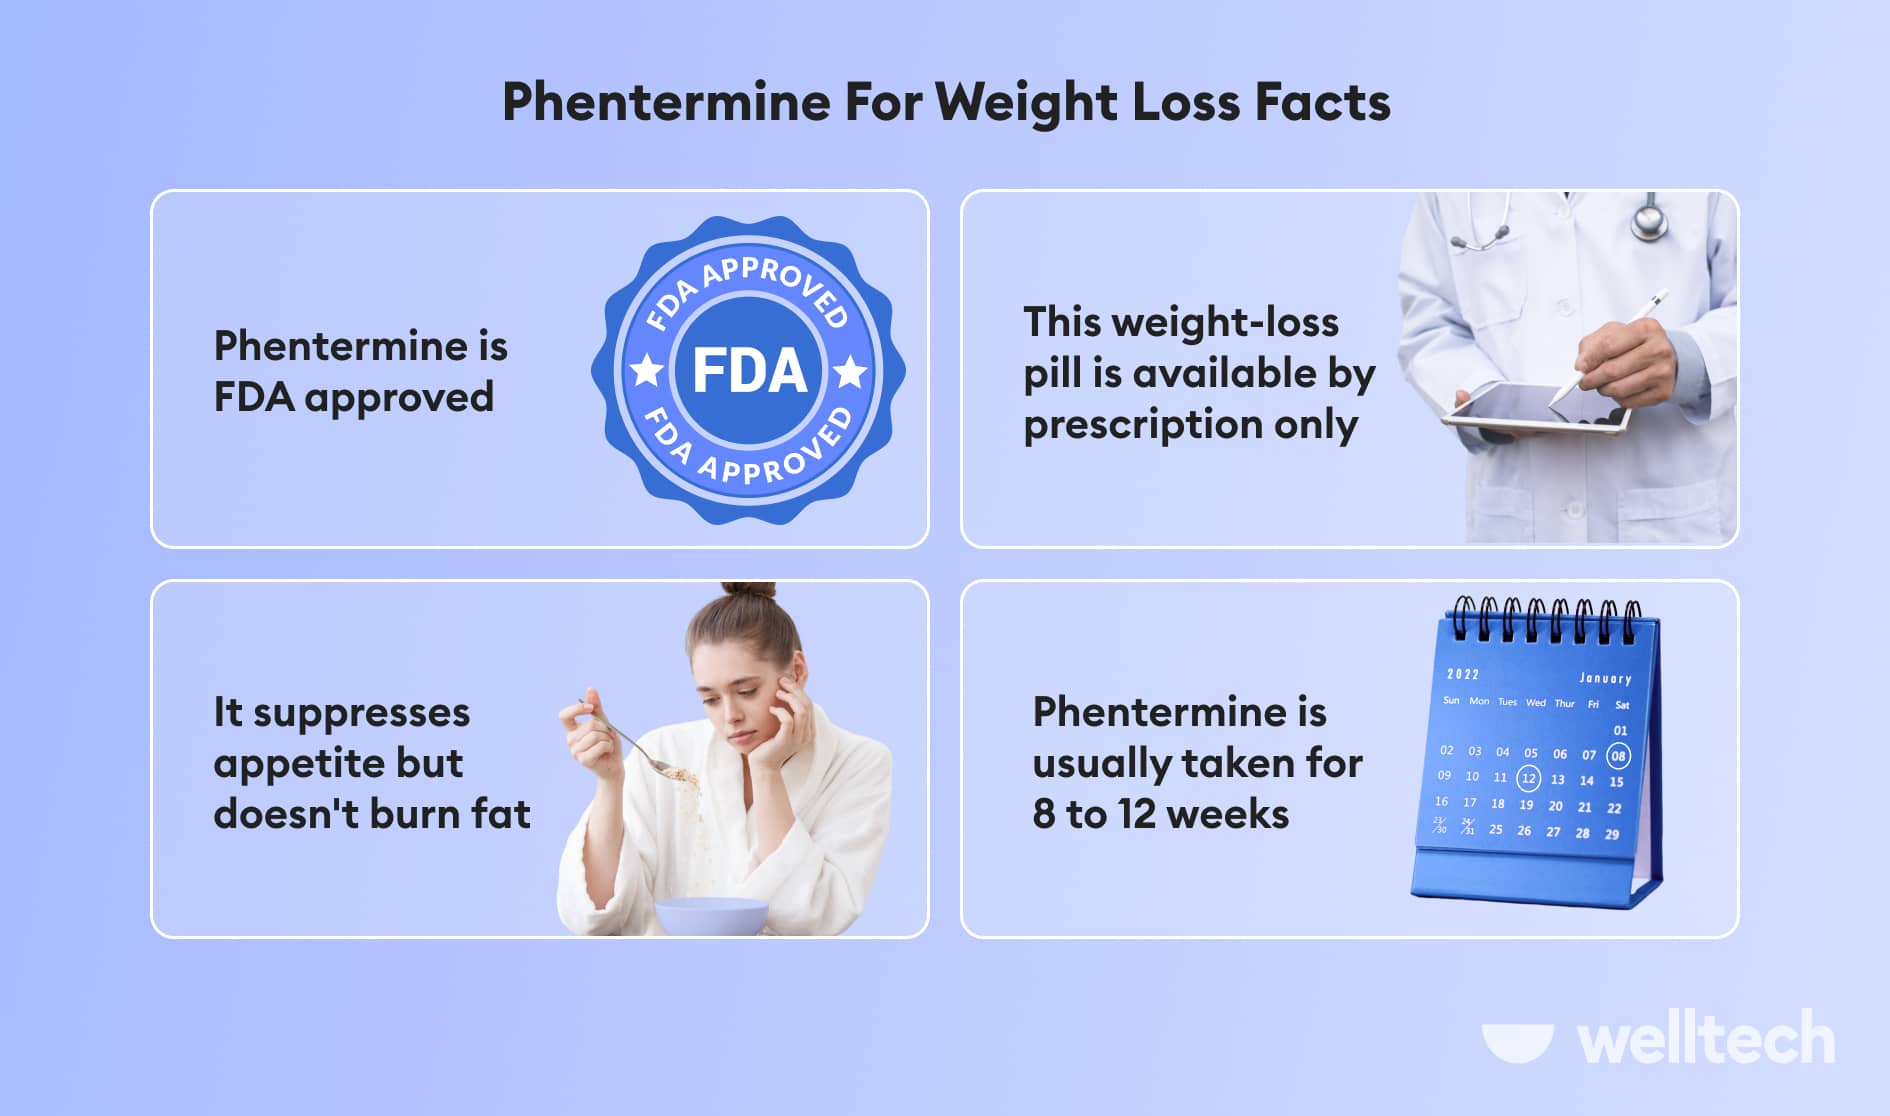 Phentermine For Weight Loss Who Can It Be Prescribed to and Why